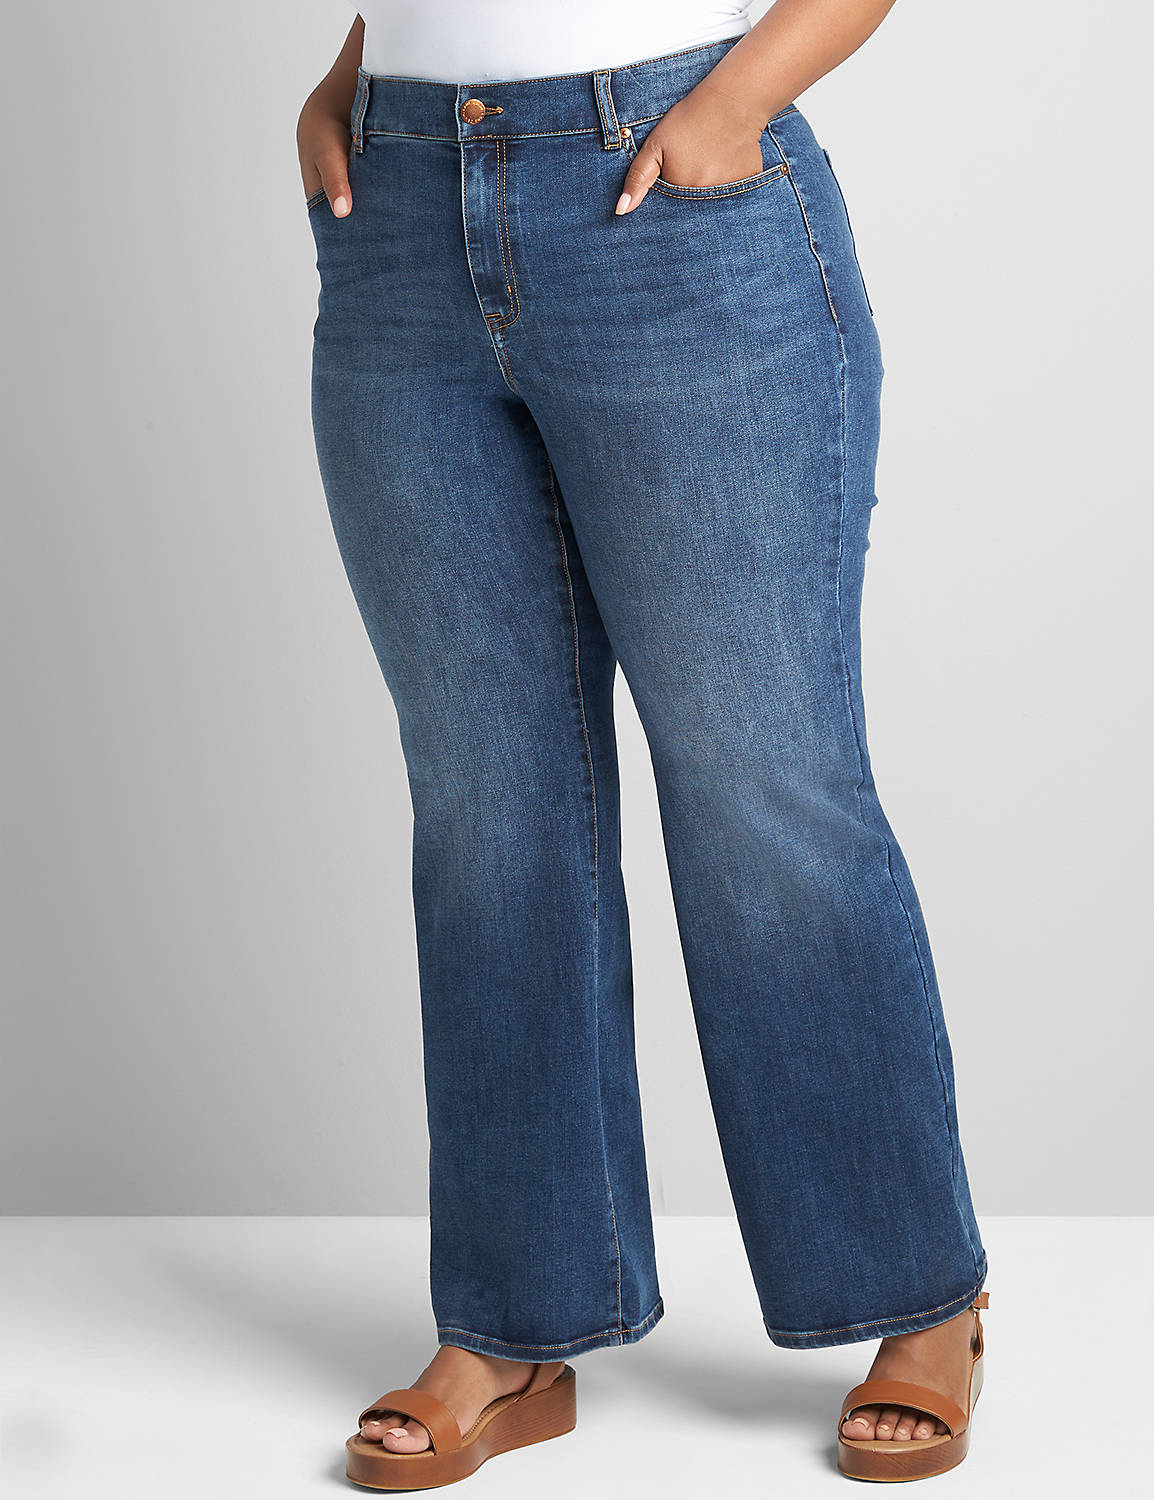 Curvy Fit High-Rise Boot Jean Product Image 1